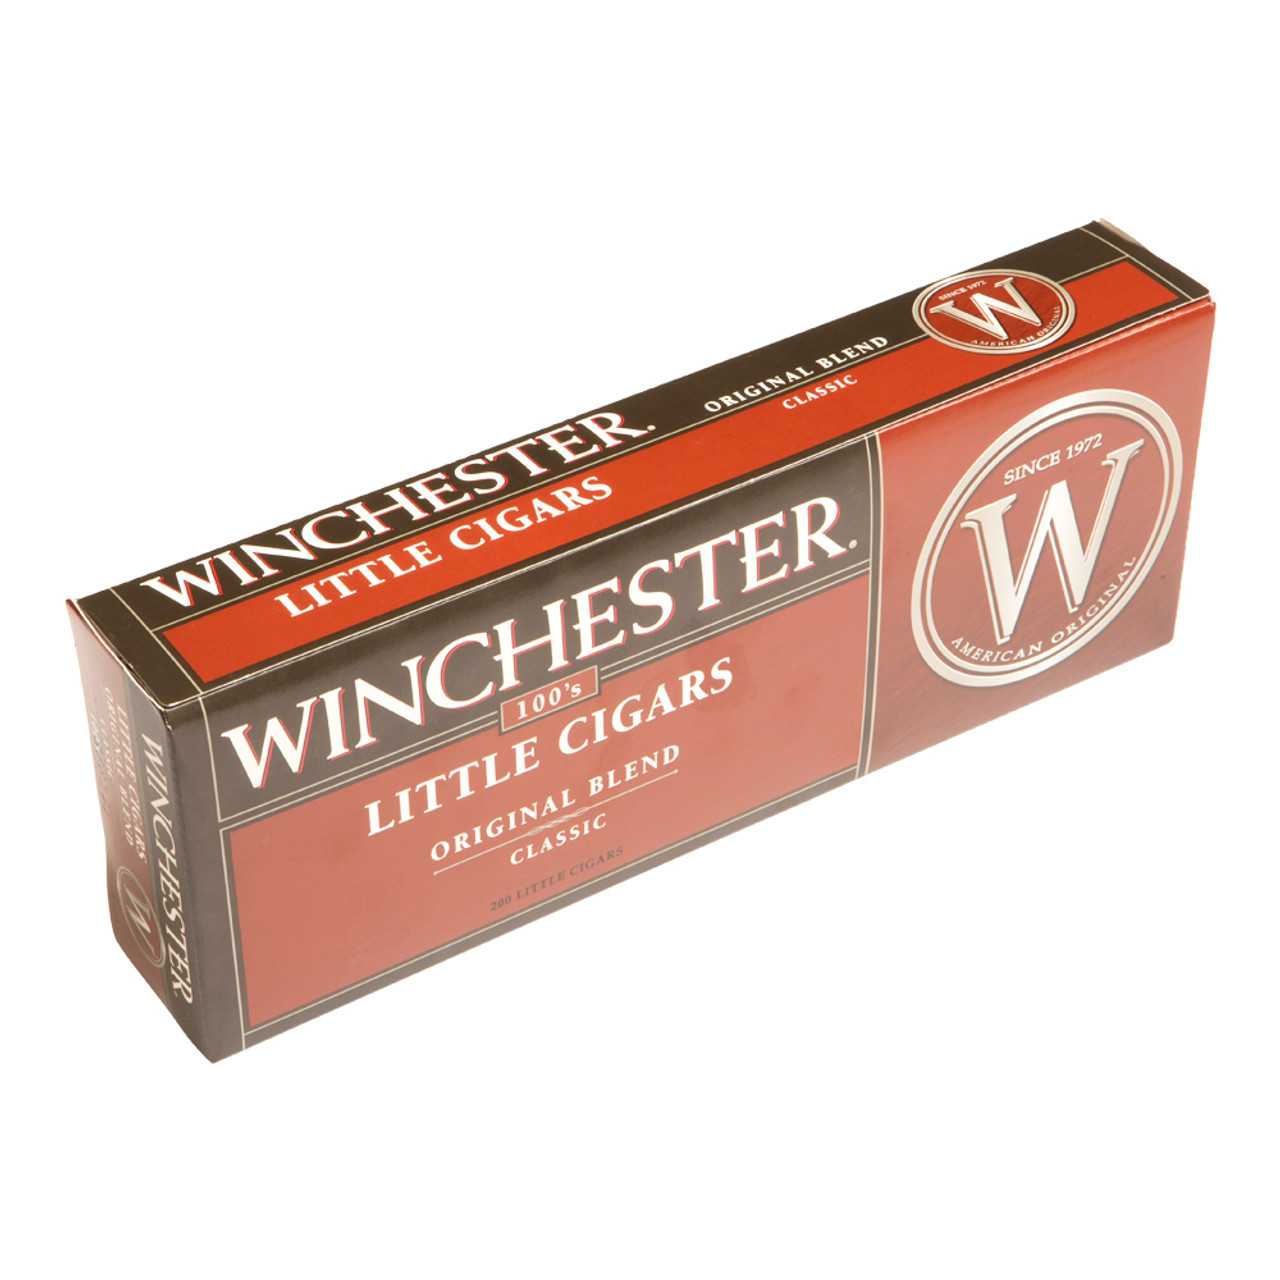 Winchester Little Cigars Classic Cigars - 3.9 x 20 (10 Packs of 20 (200 total)) *Box